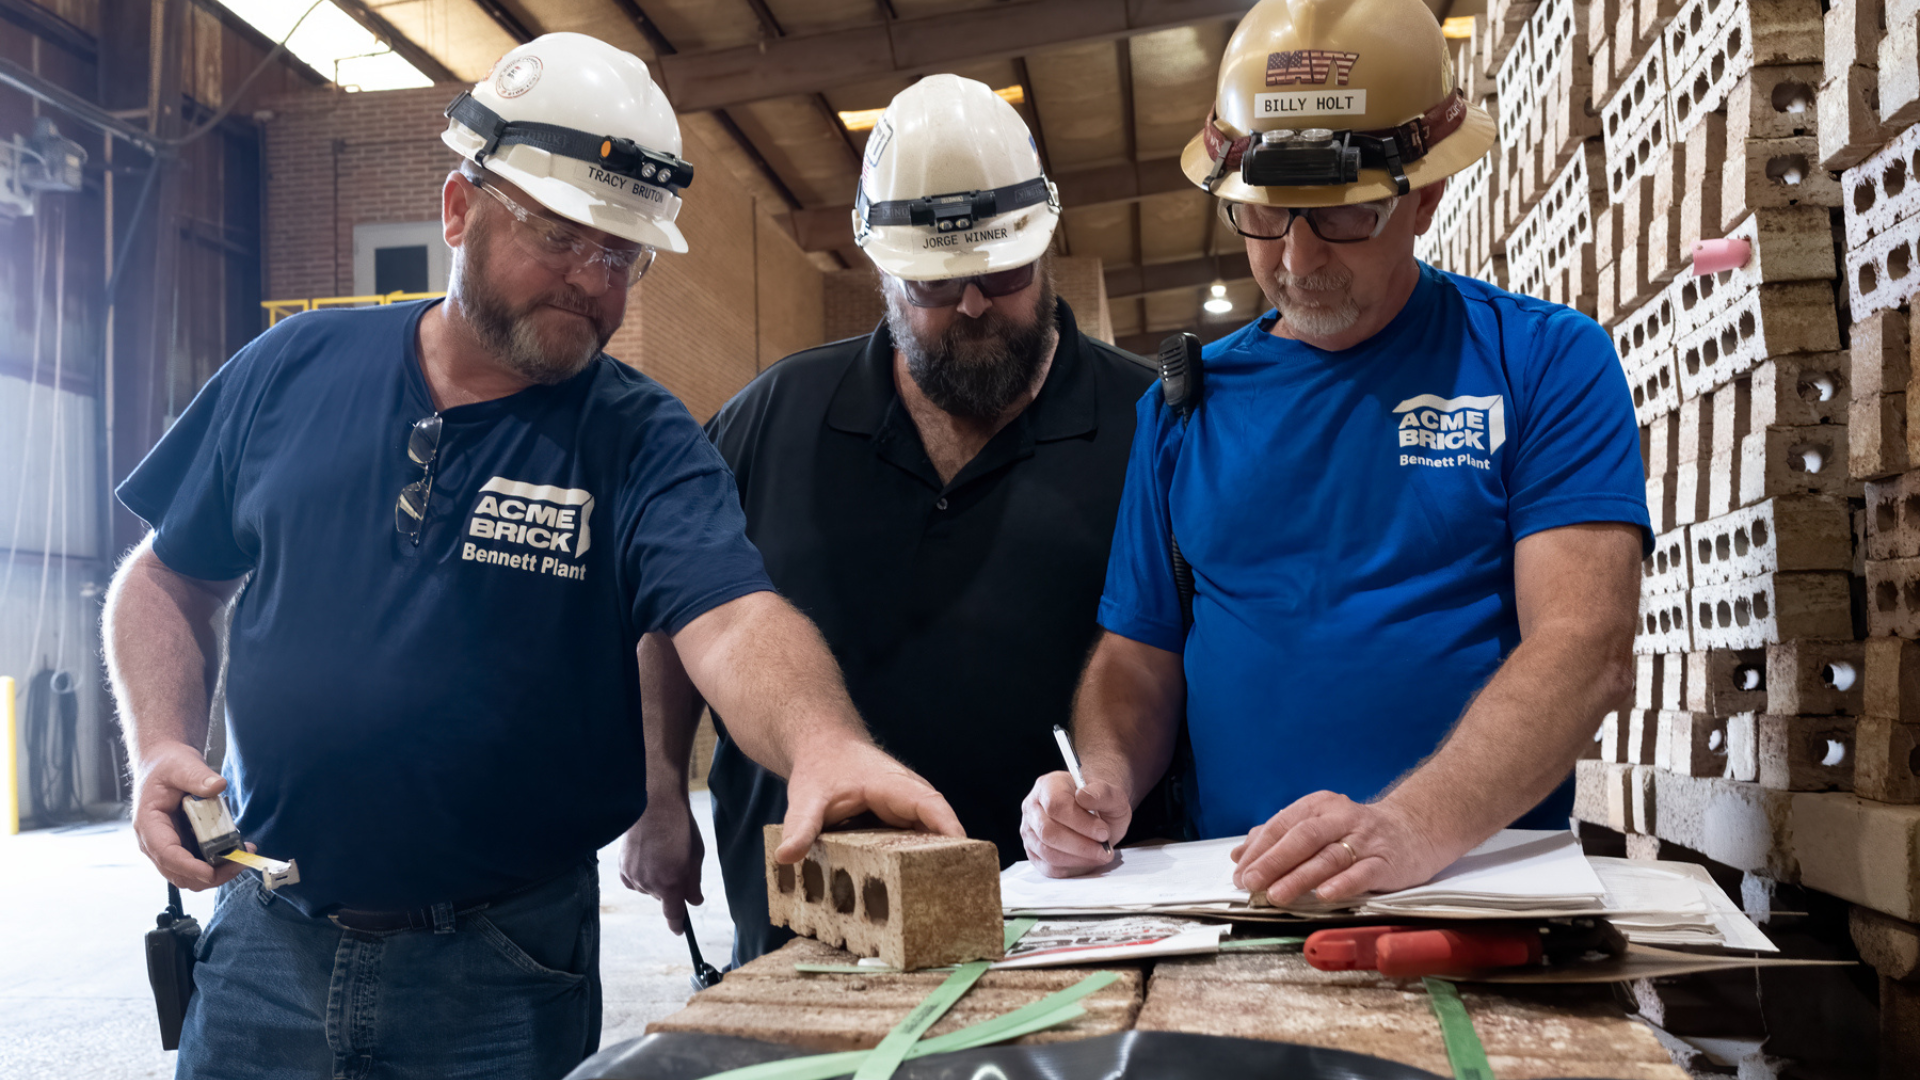 Three Acme Brick workers in blue, Acme Brick branded shirts working